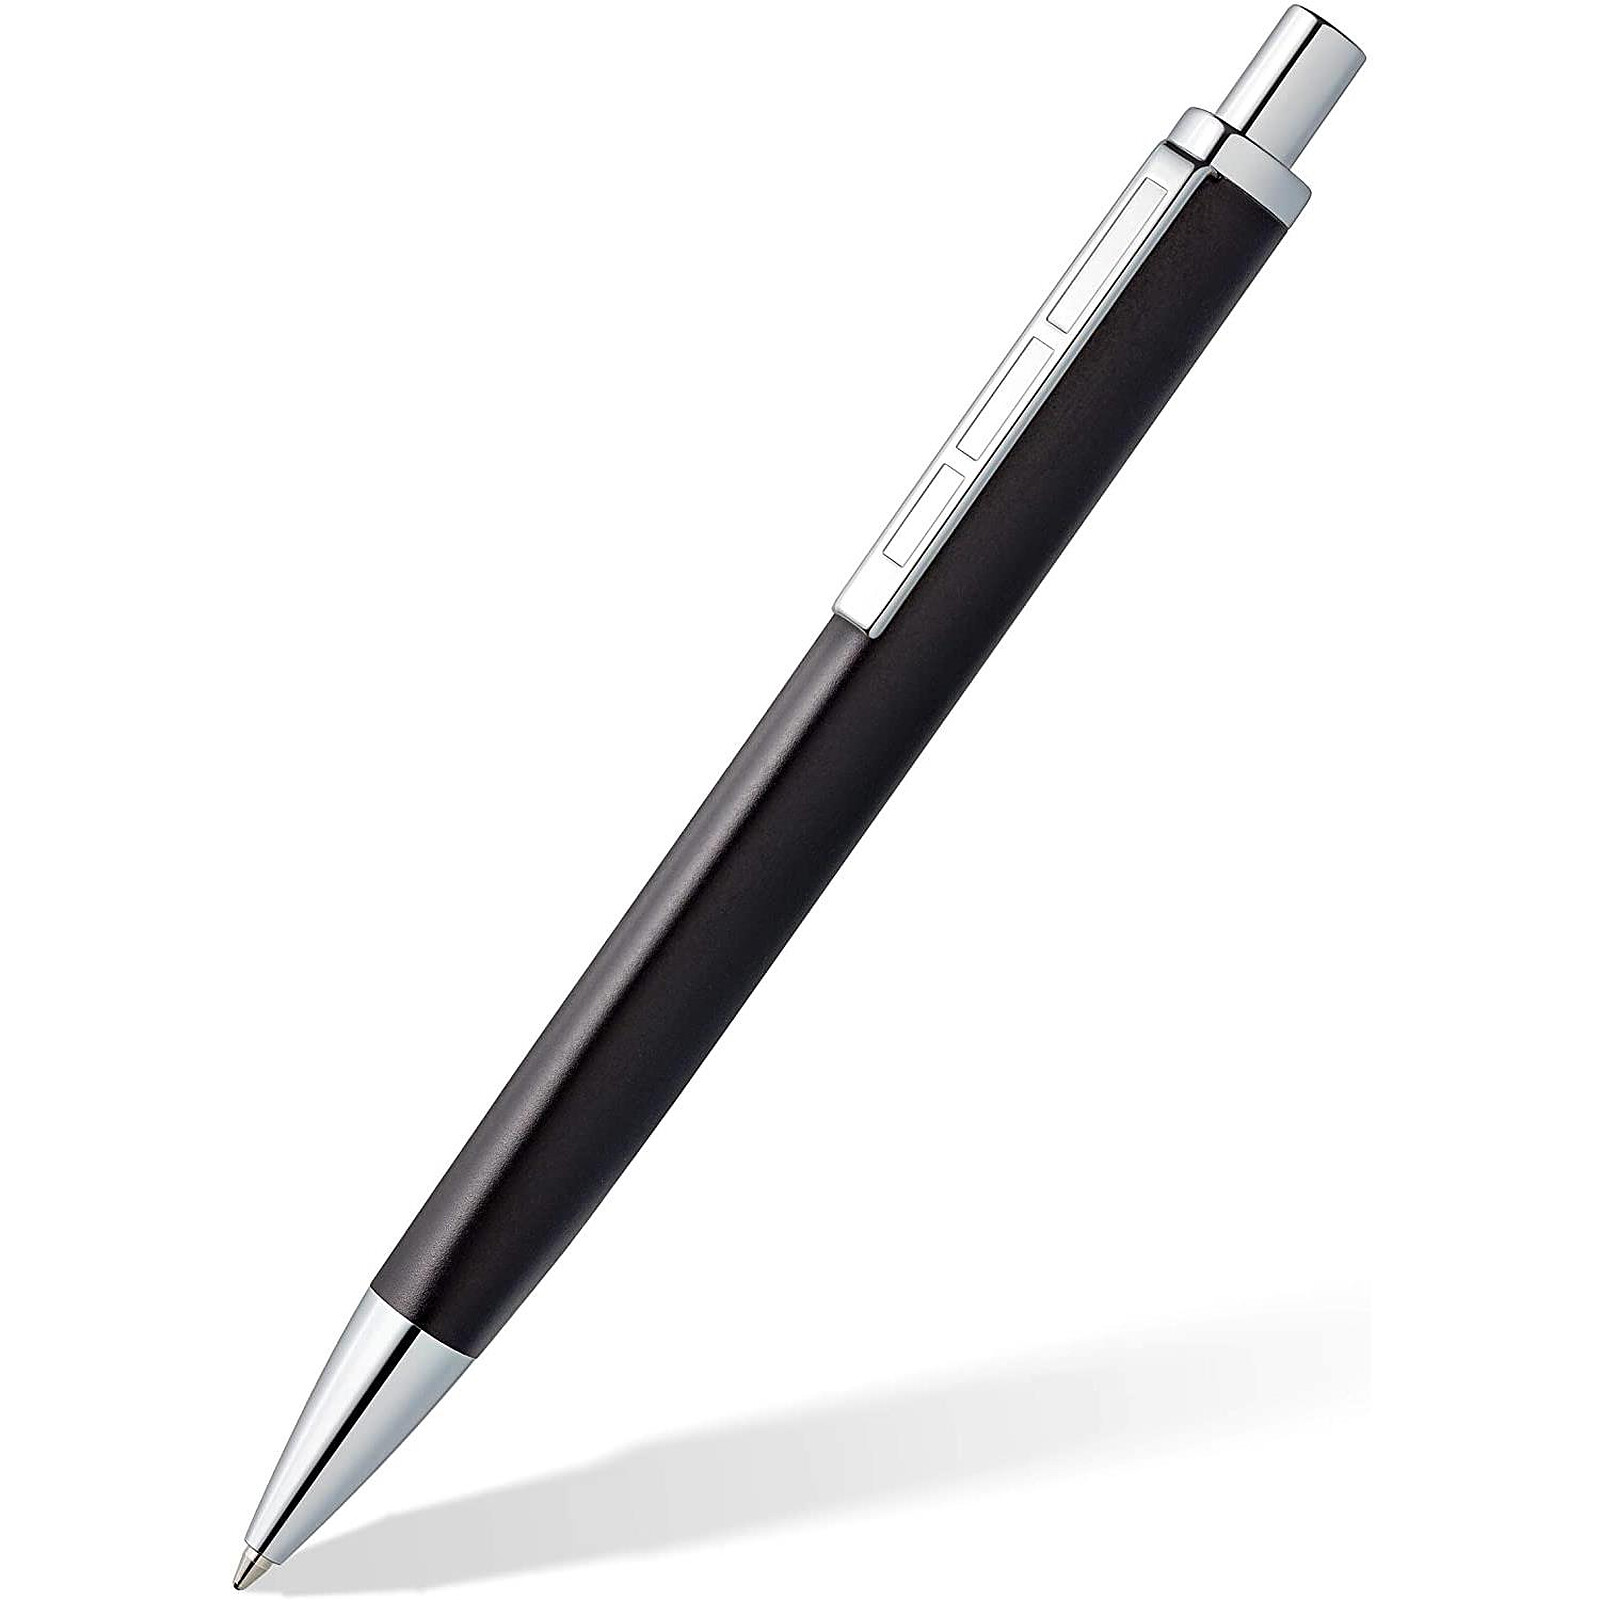 STAEDTLER Stylo bille rétractable triplus, M, anthracite - Stylo